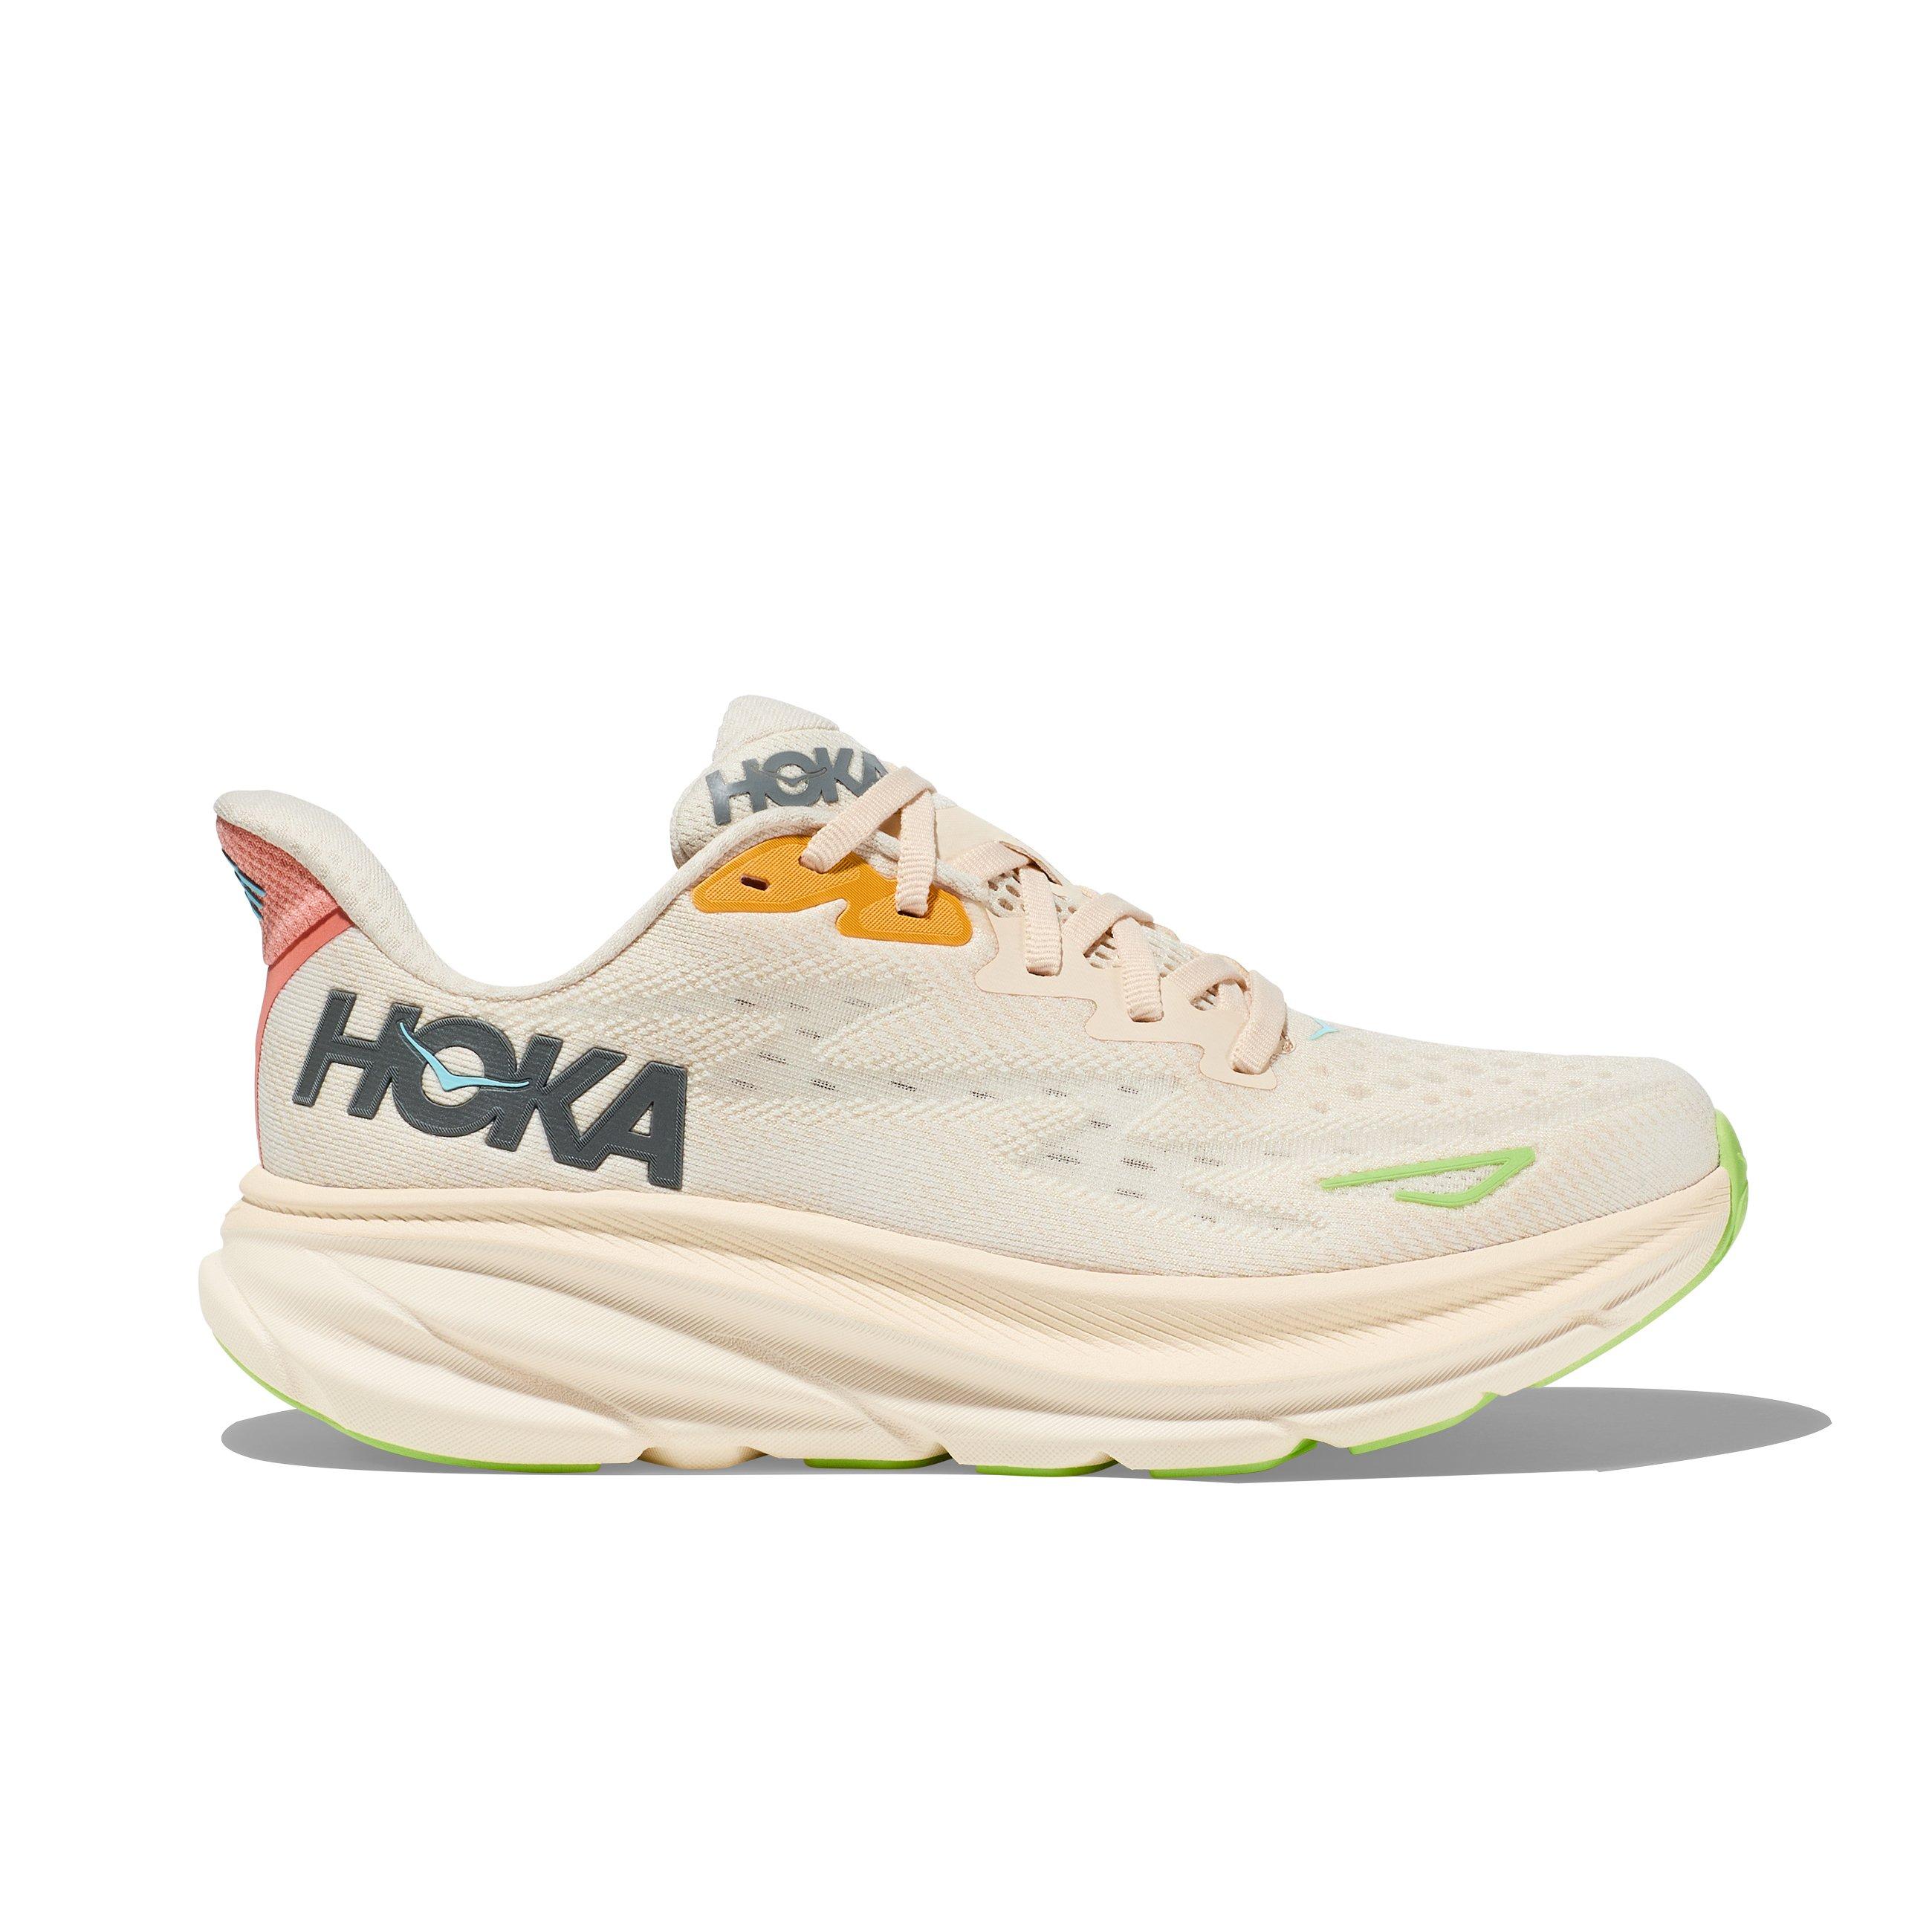 Hoka Clifton 9 First Impression Review & Comparisons 